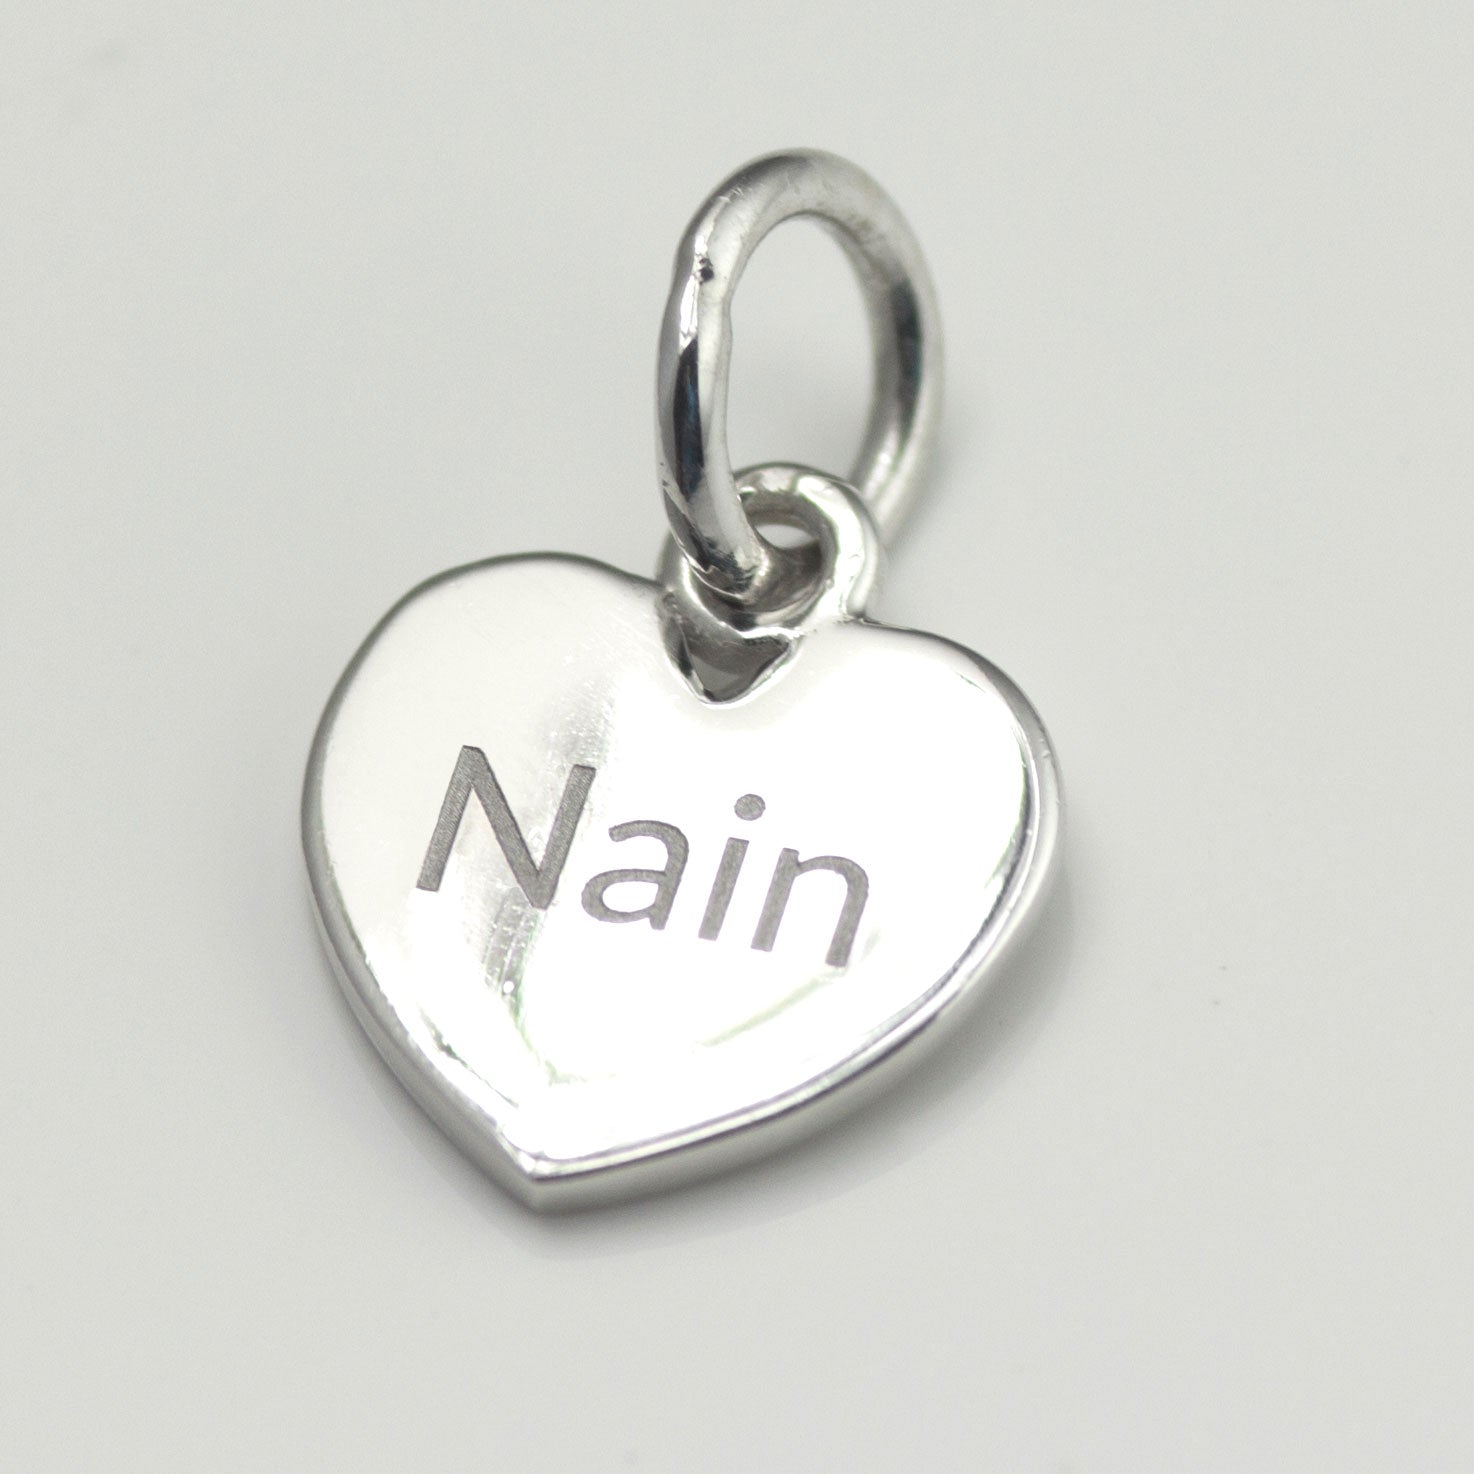 Pendant / Charm - Nan - Nain - Sterling Silver or Gold Plated-The Welsh Gift Shop